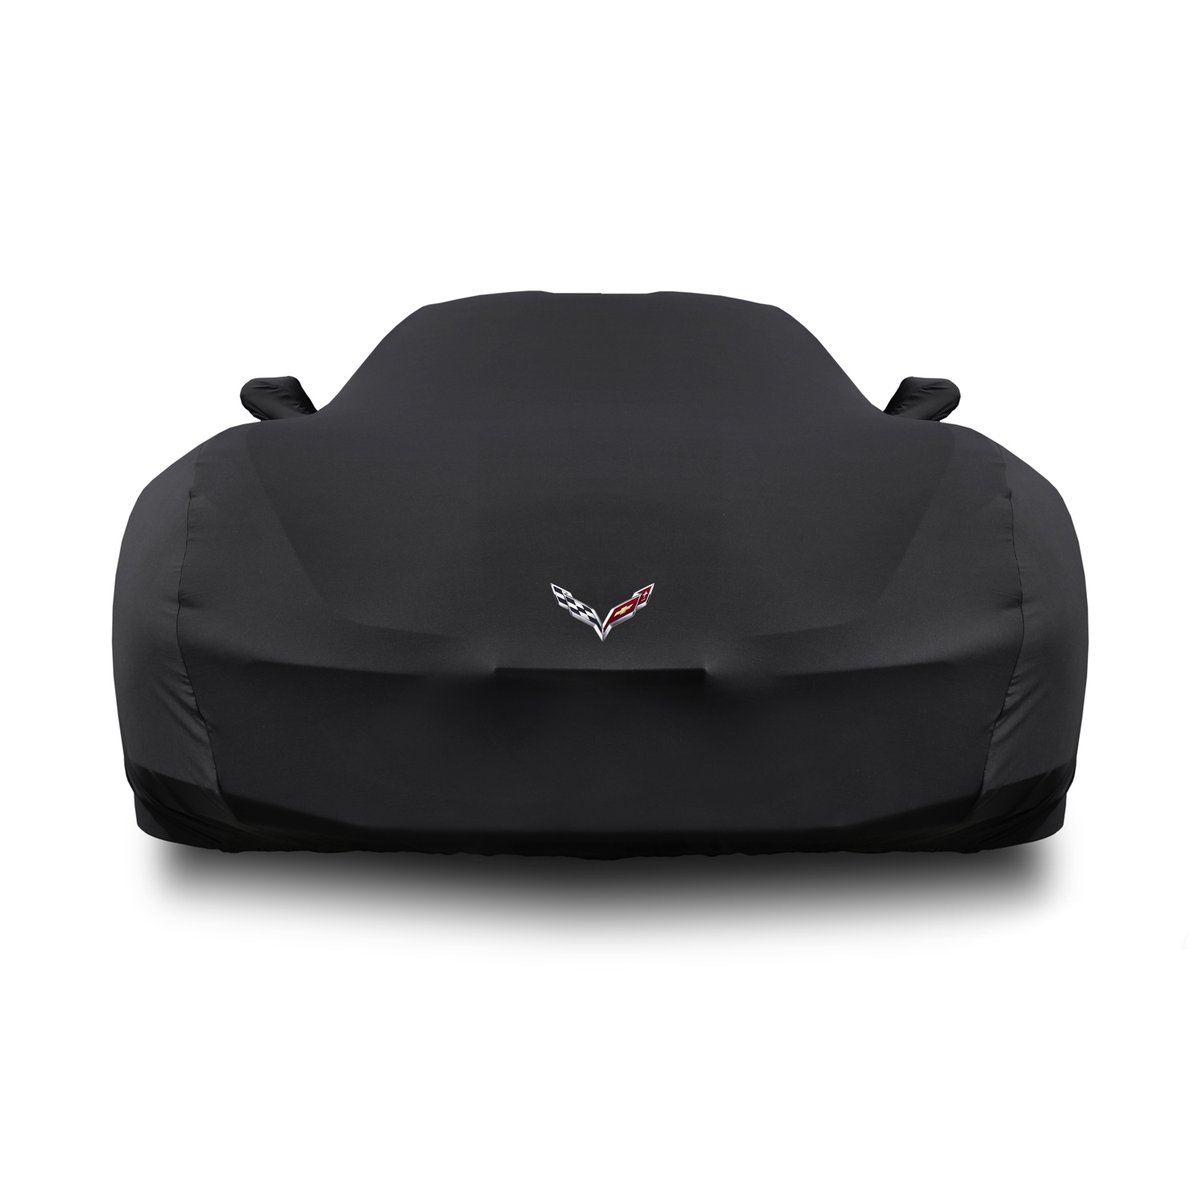 A view of a mystery corvette; meant to symbolize the 2023 C8 Corvette Z06